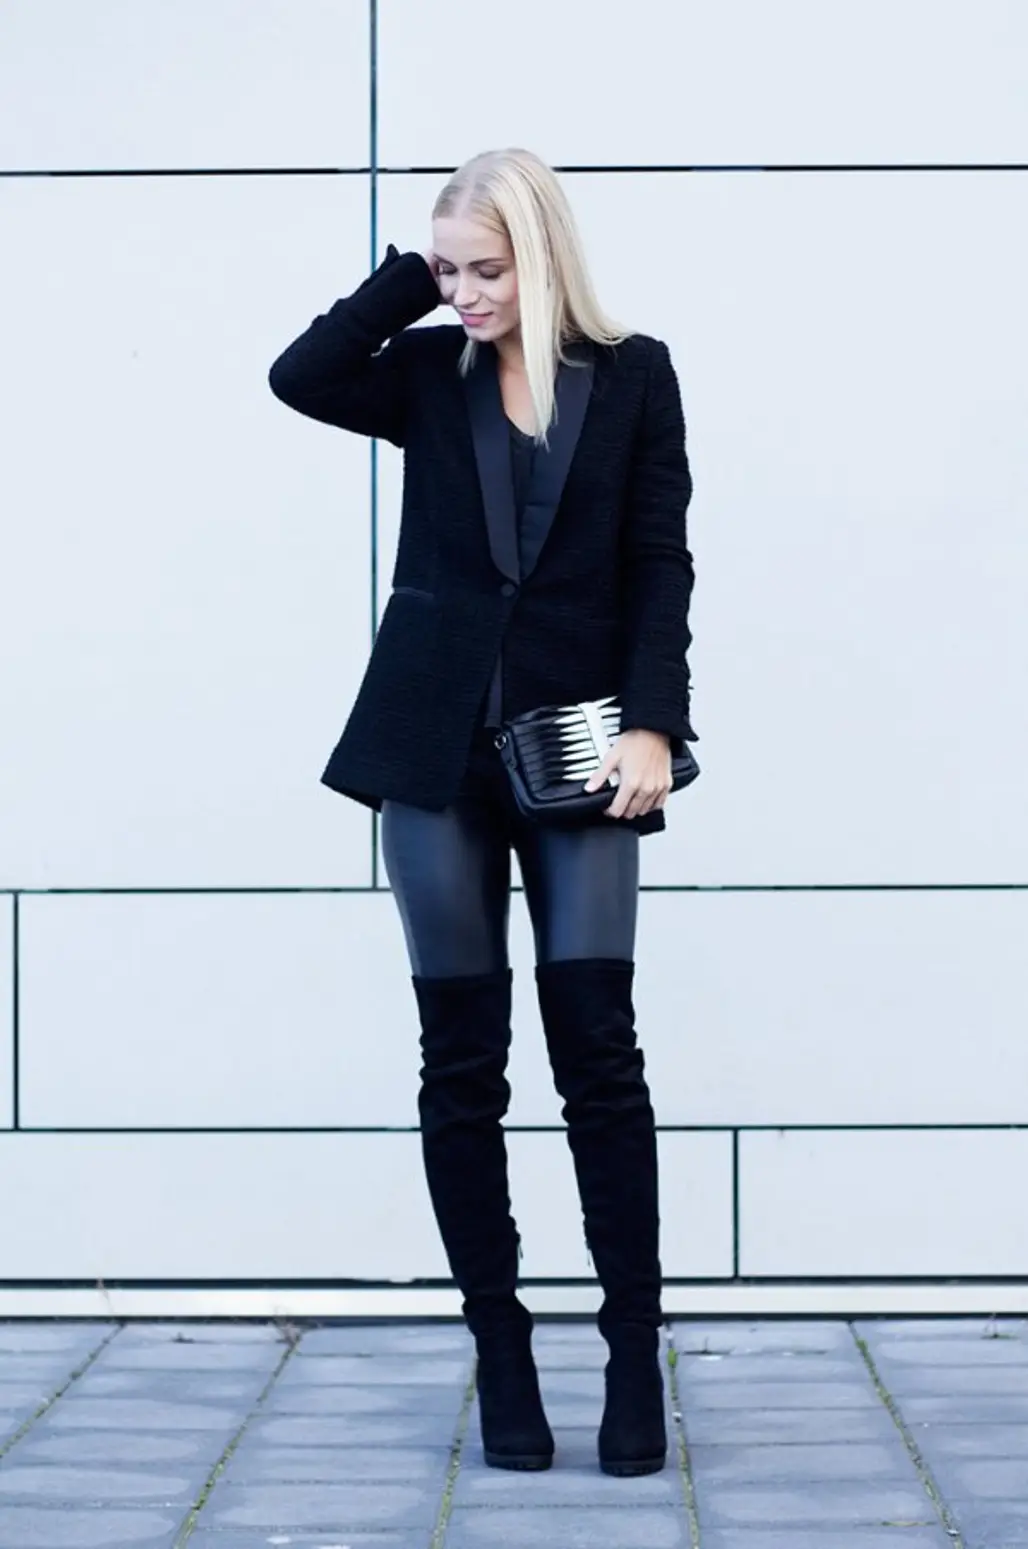 Tall Boots and a Clutch